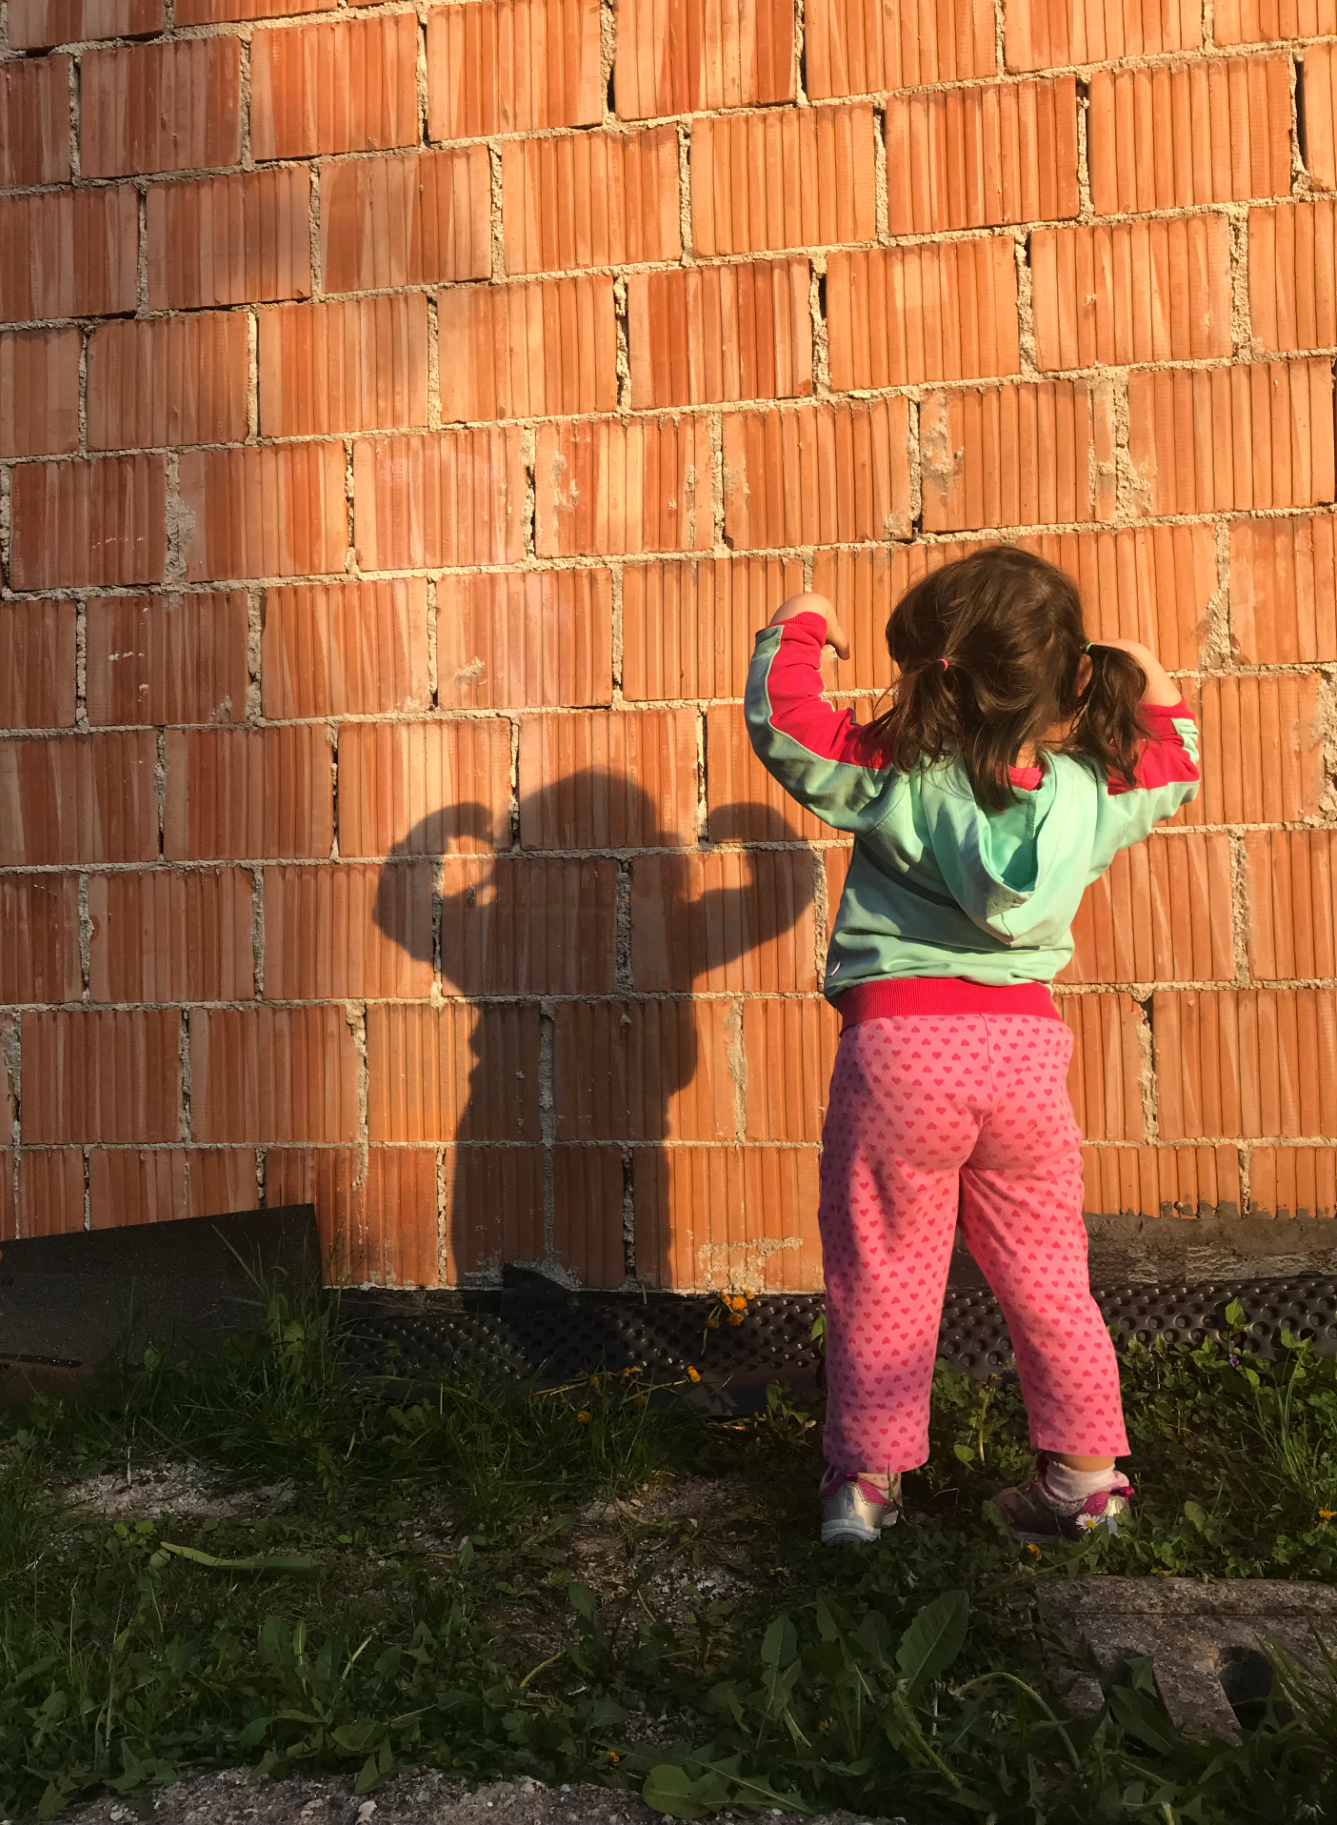 photographs: of a young girl making a pose and looking at her shadow on the wall